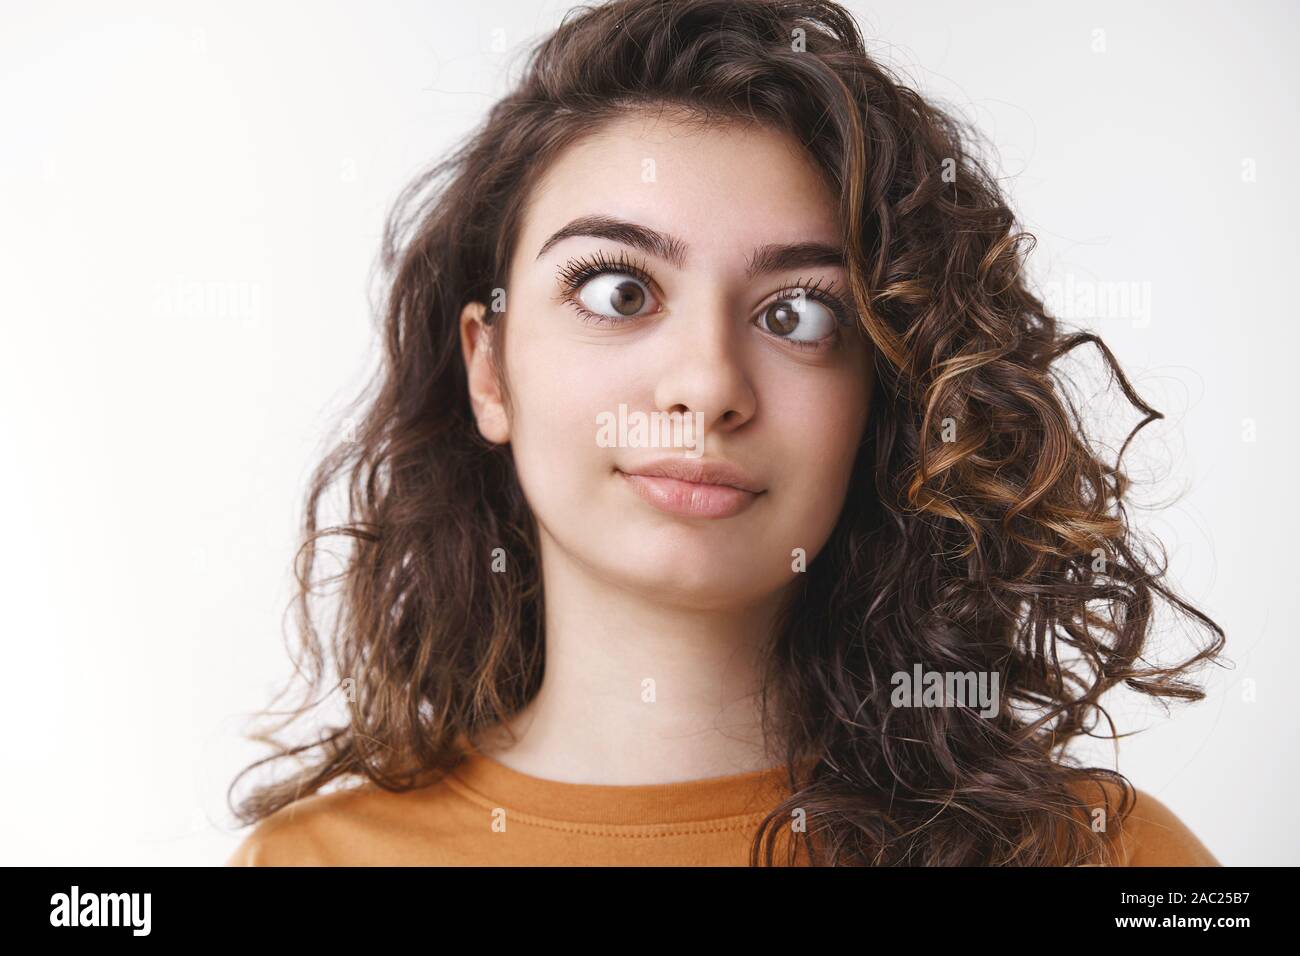 Girl feel bored acting weird fool around squinting eyes different sides make funny grimaces mimick, standing white background crazy head gonna blow up Stock Photo